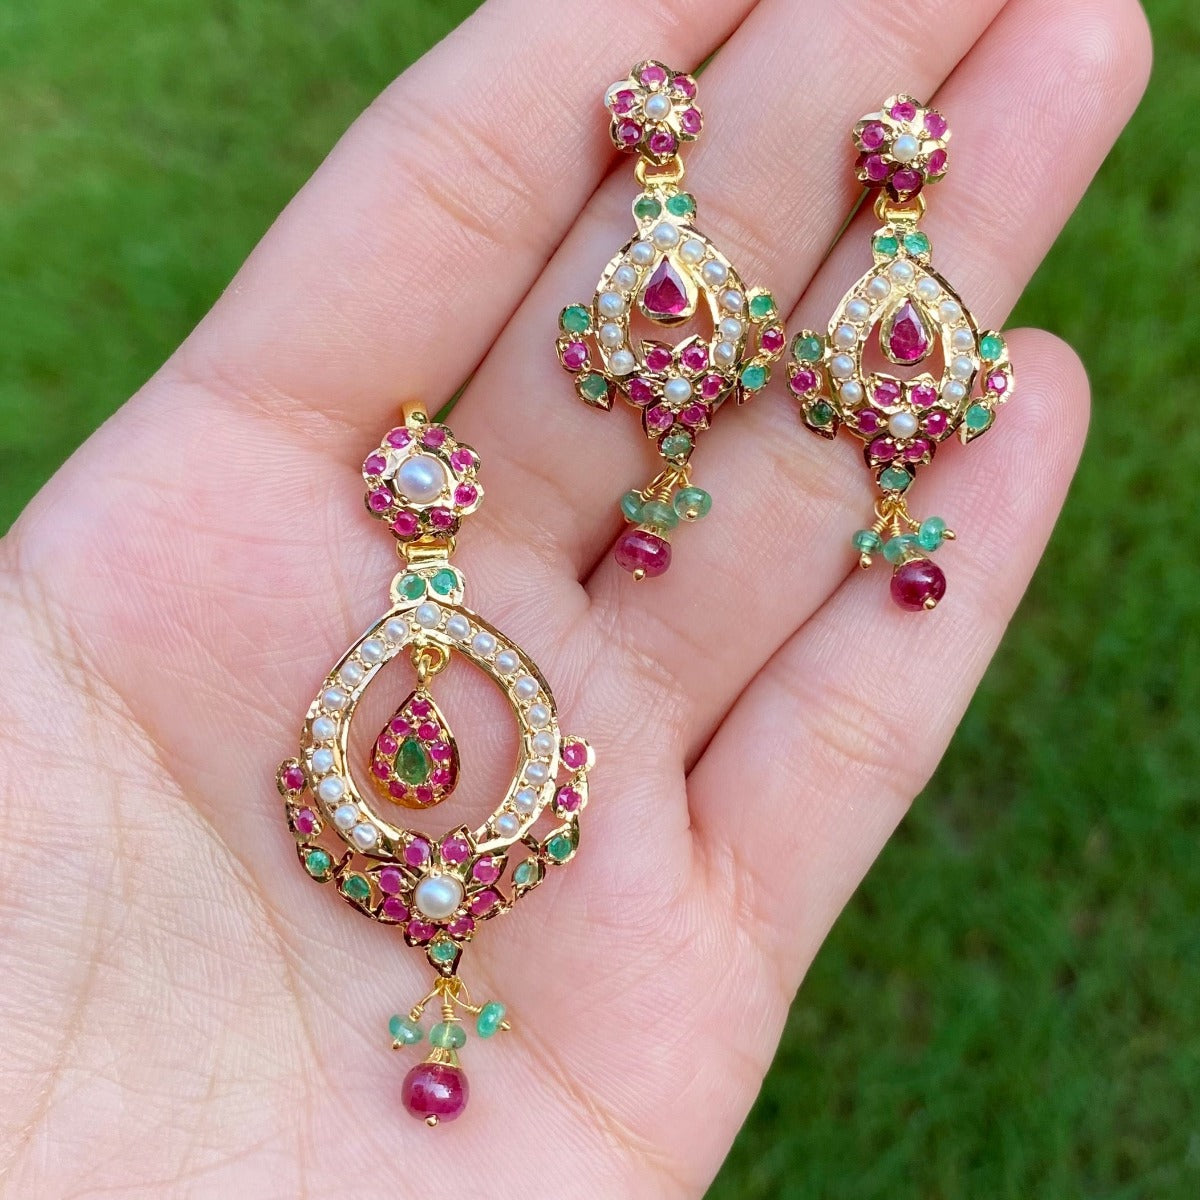 Shop real Gold Pendant and Earring Sets